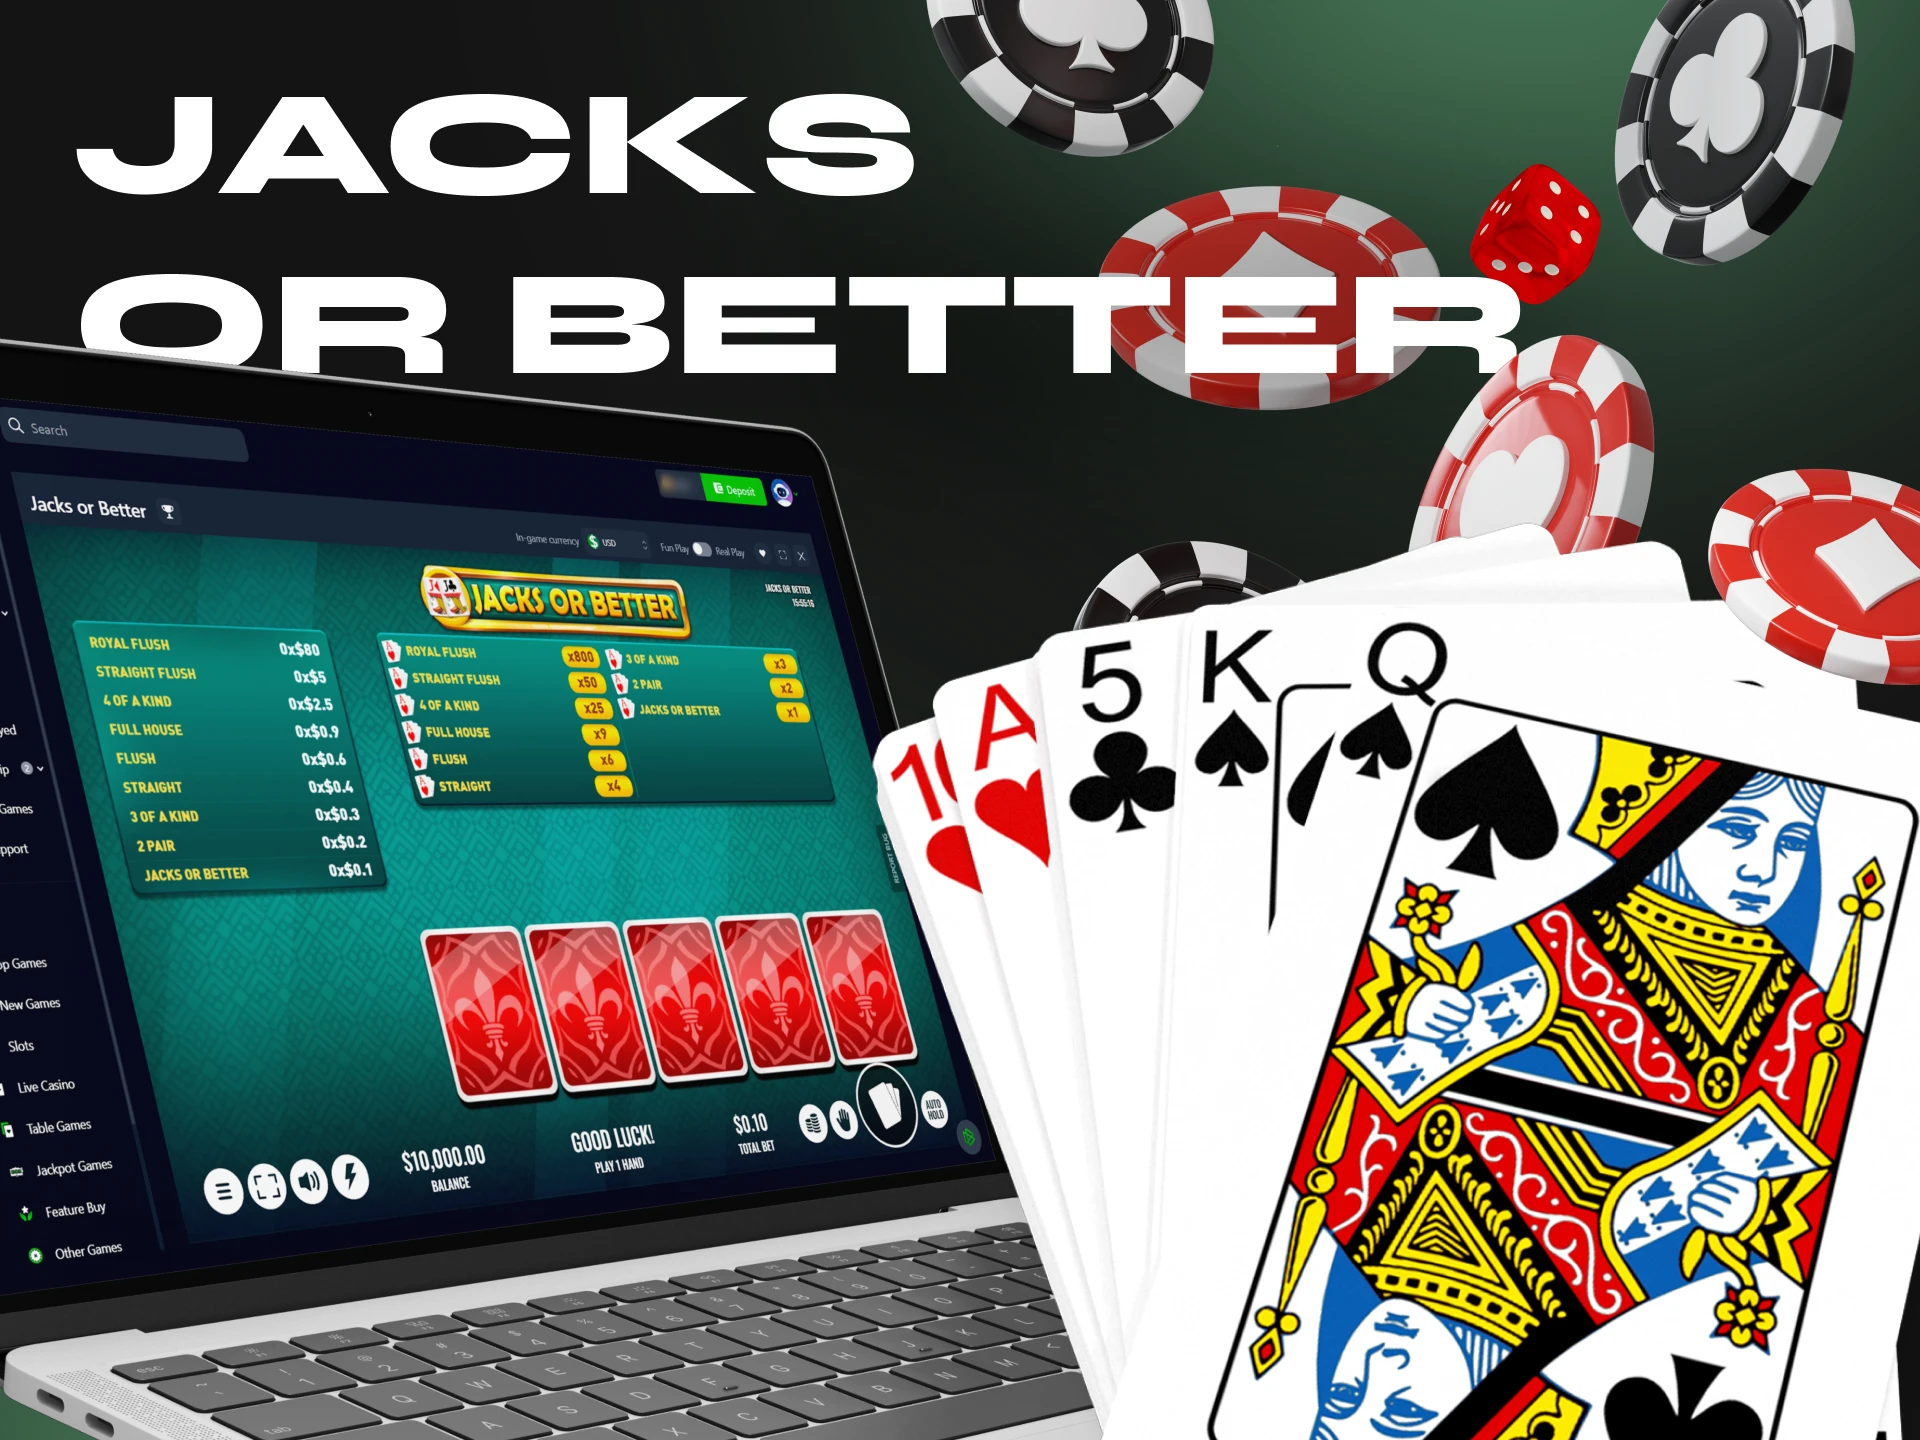 Try playing Jacks or Better poker game with cryptocurrency.